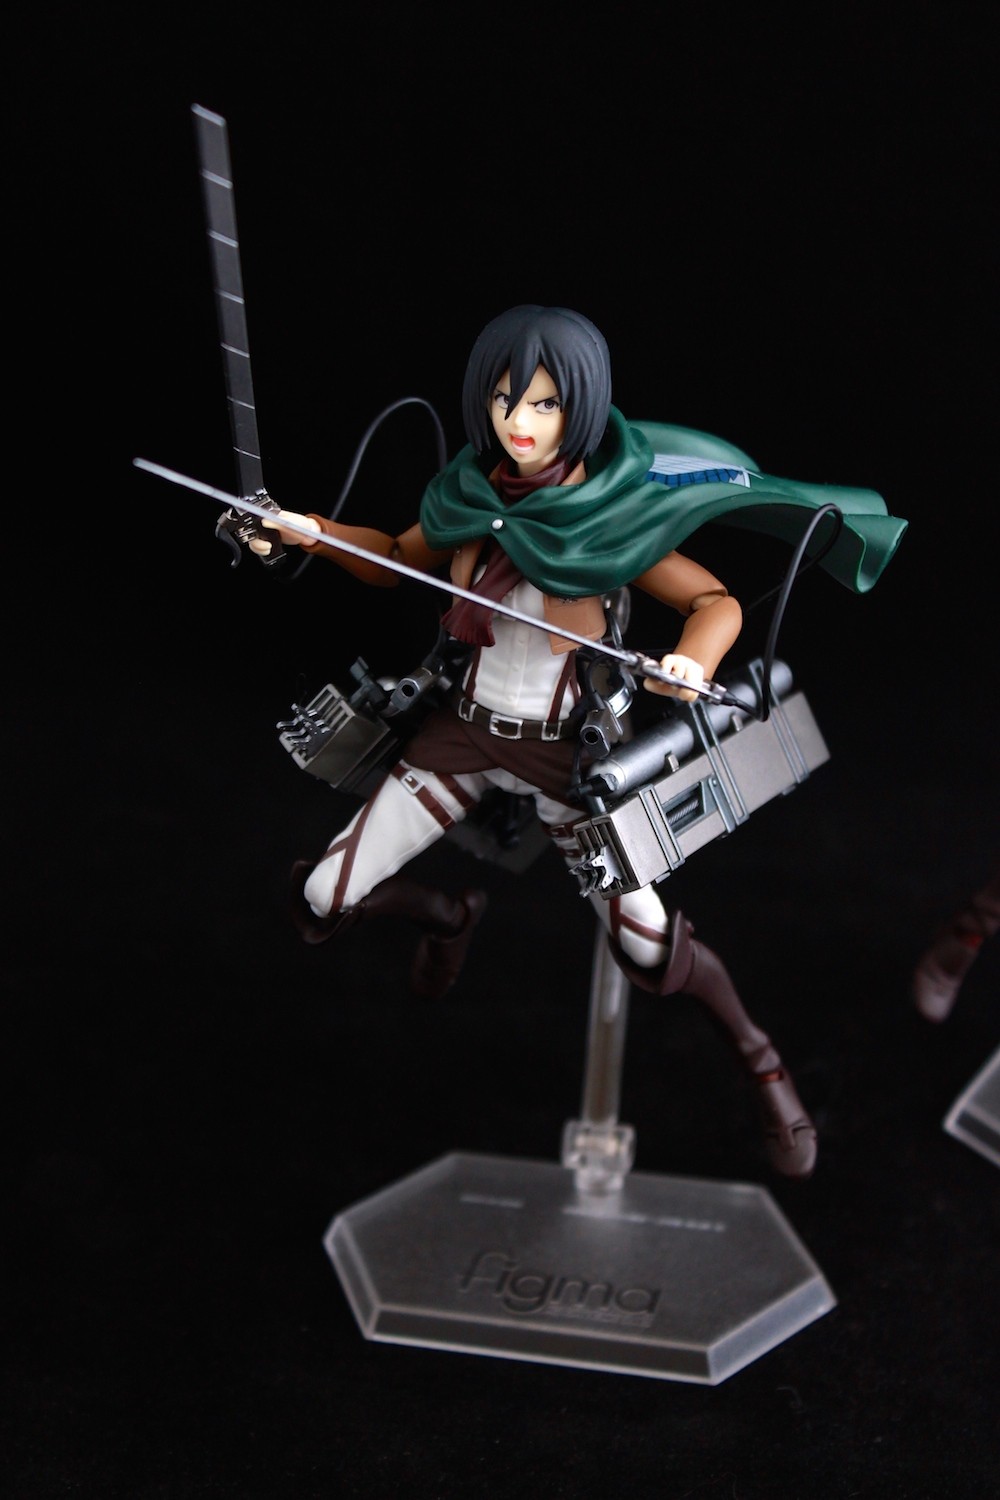 We absolutely love the Mikasa fig. Two thumbs up.